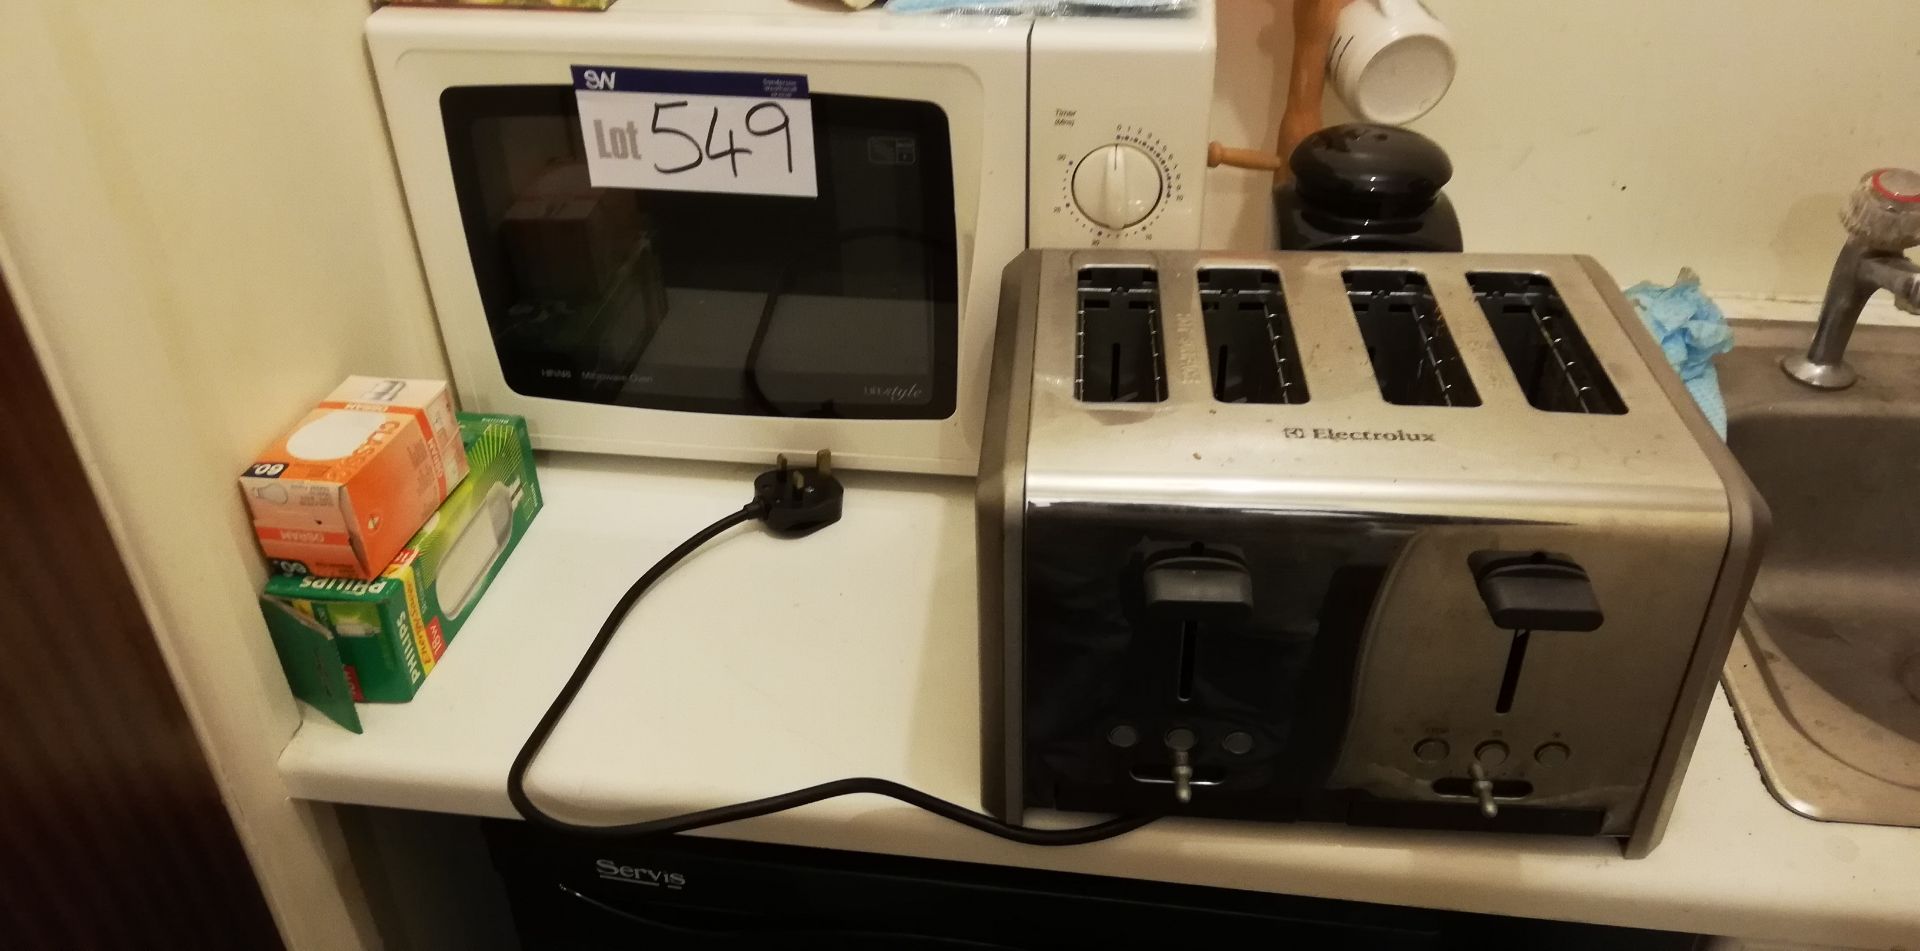 Hinari Microwave and Electrolux Toaster